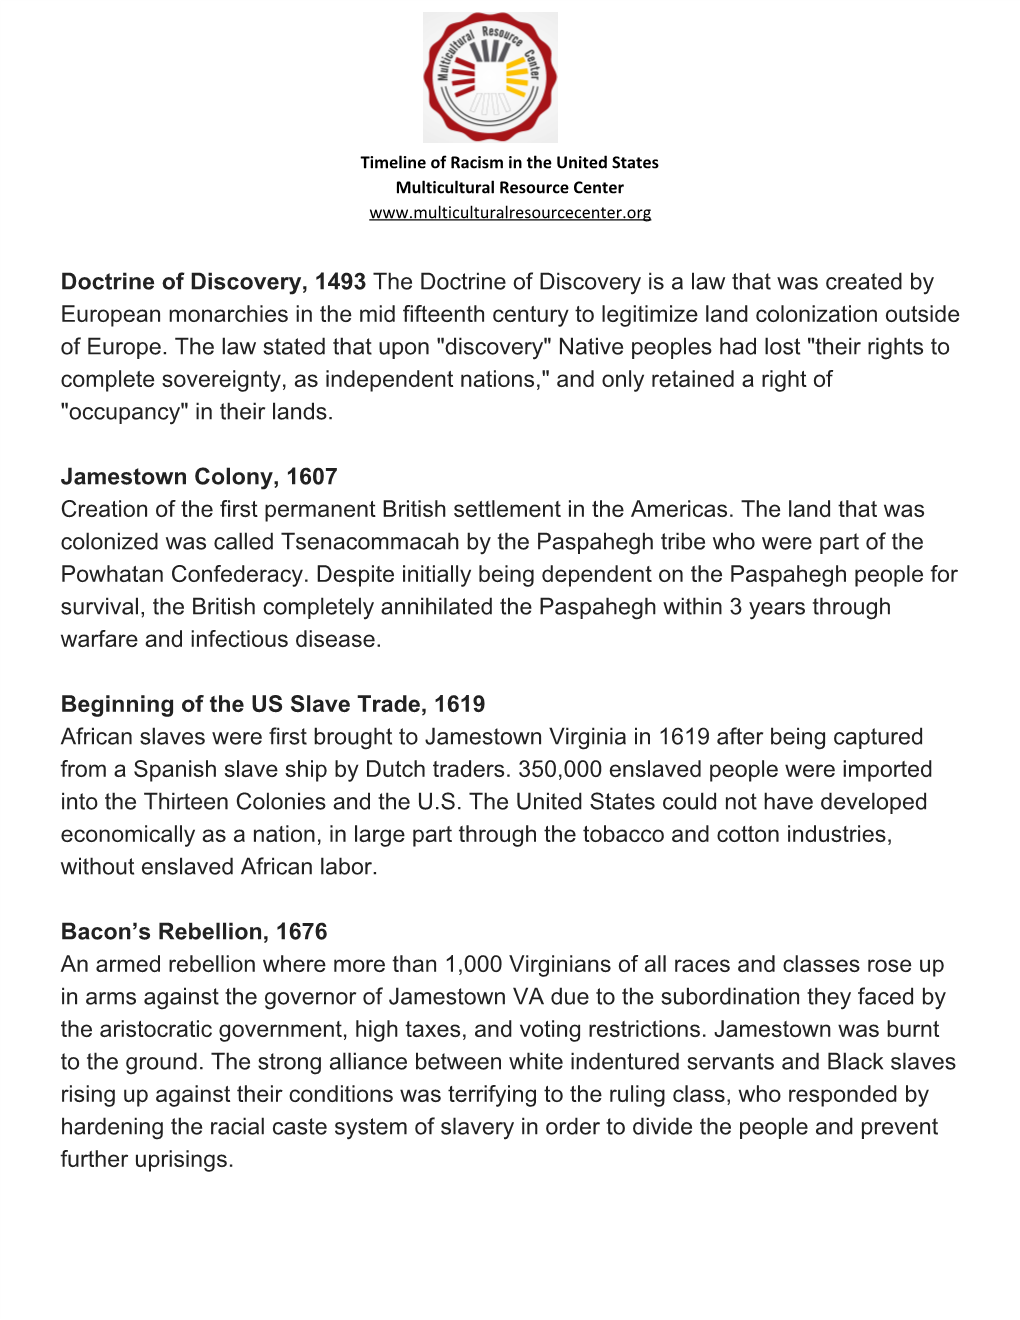 Timeline of Racism in the United States Multicultural Resource Center